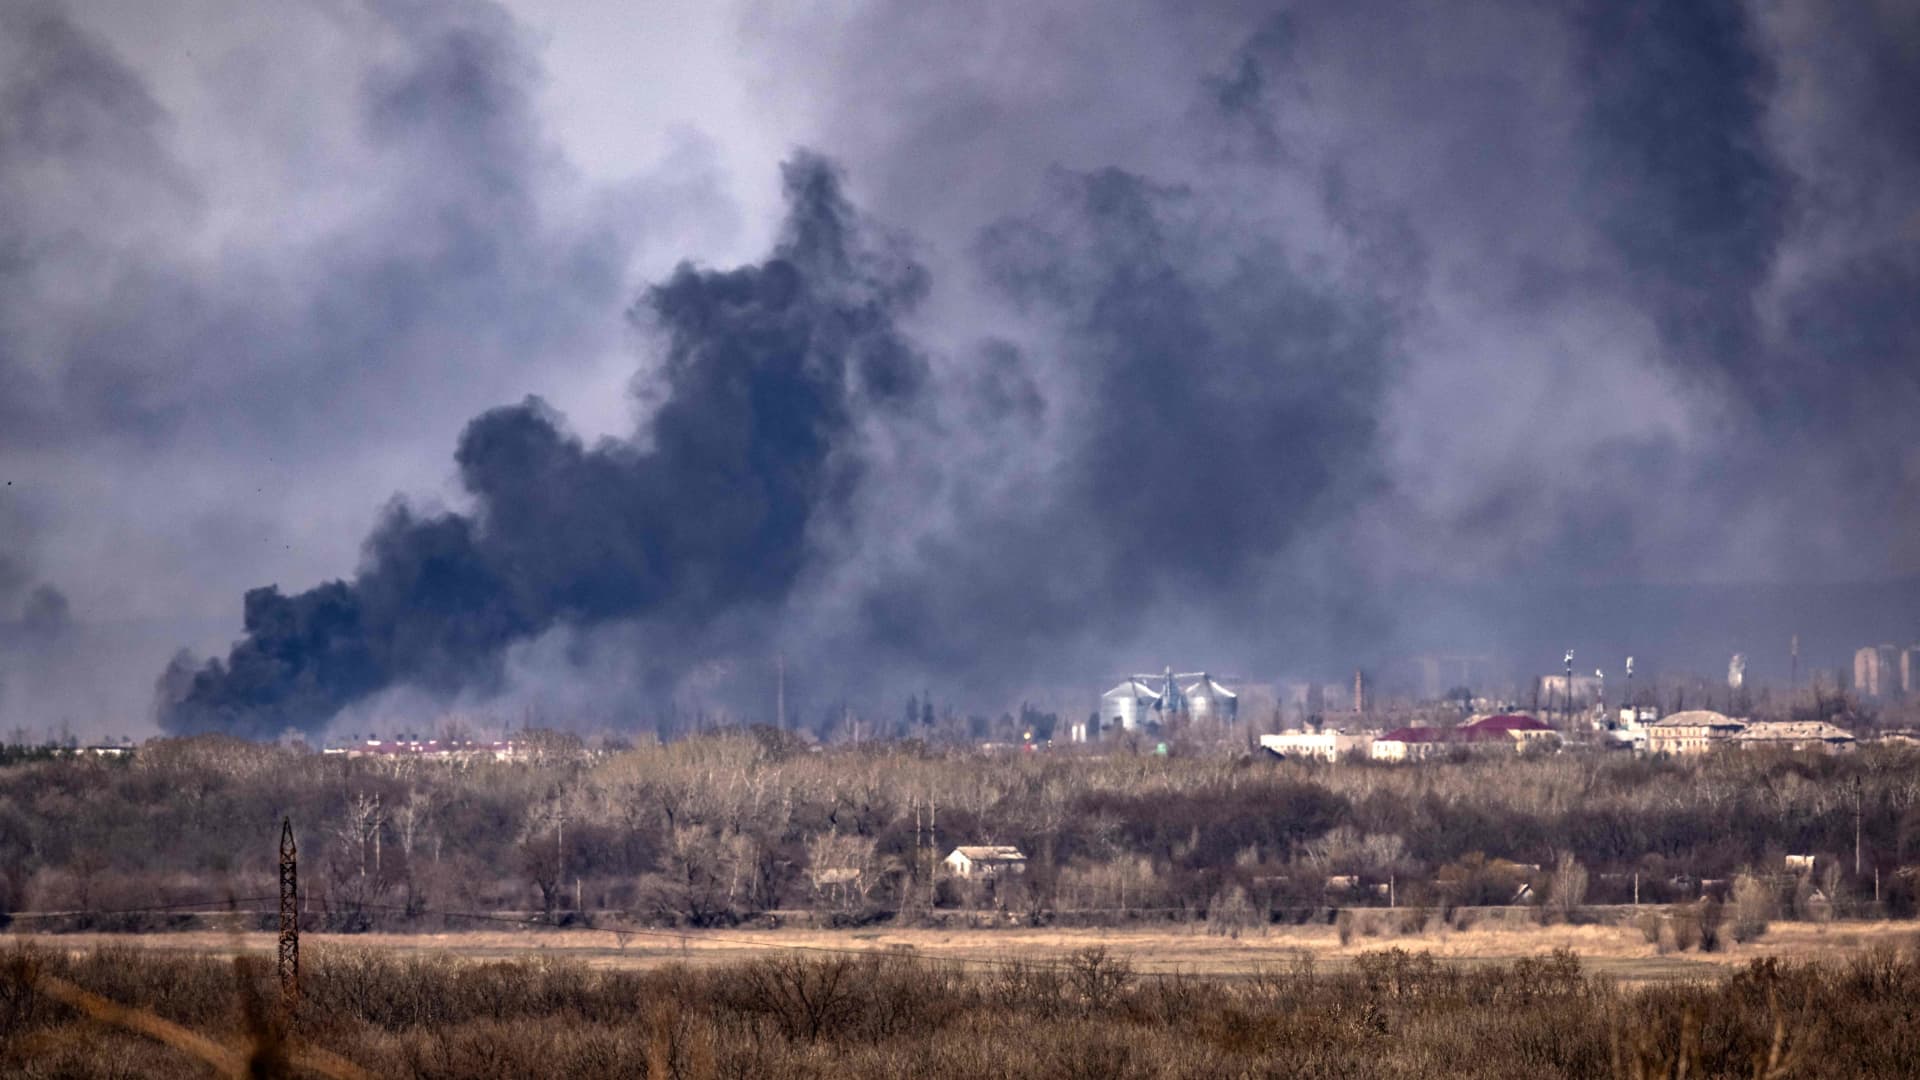 Smoke rises over the town of Rubizhne, Donbas region, on April 7, 2022, amid Russia's military invasion launched on Ukraine.